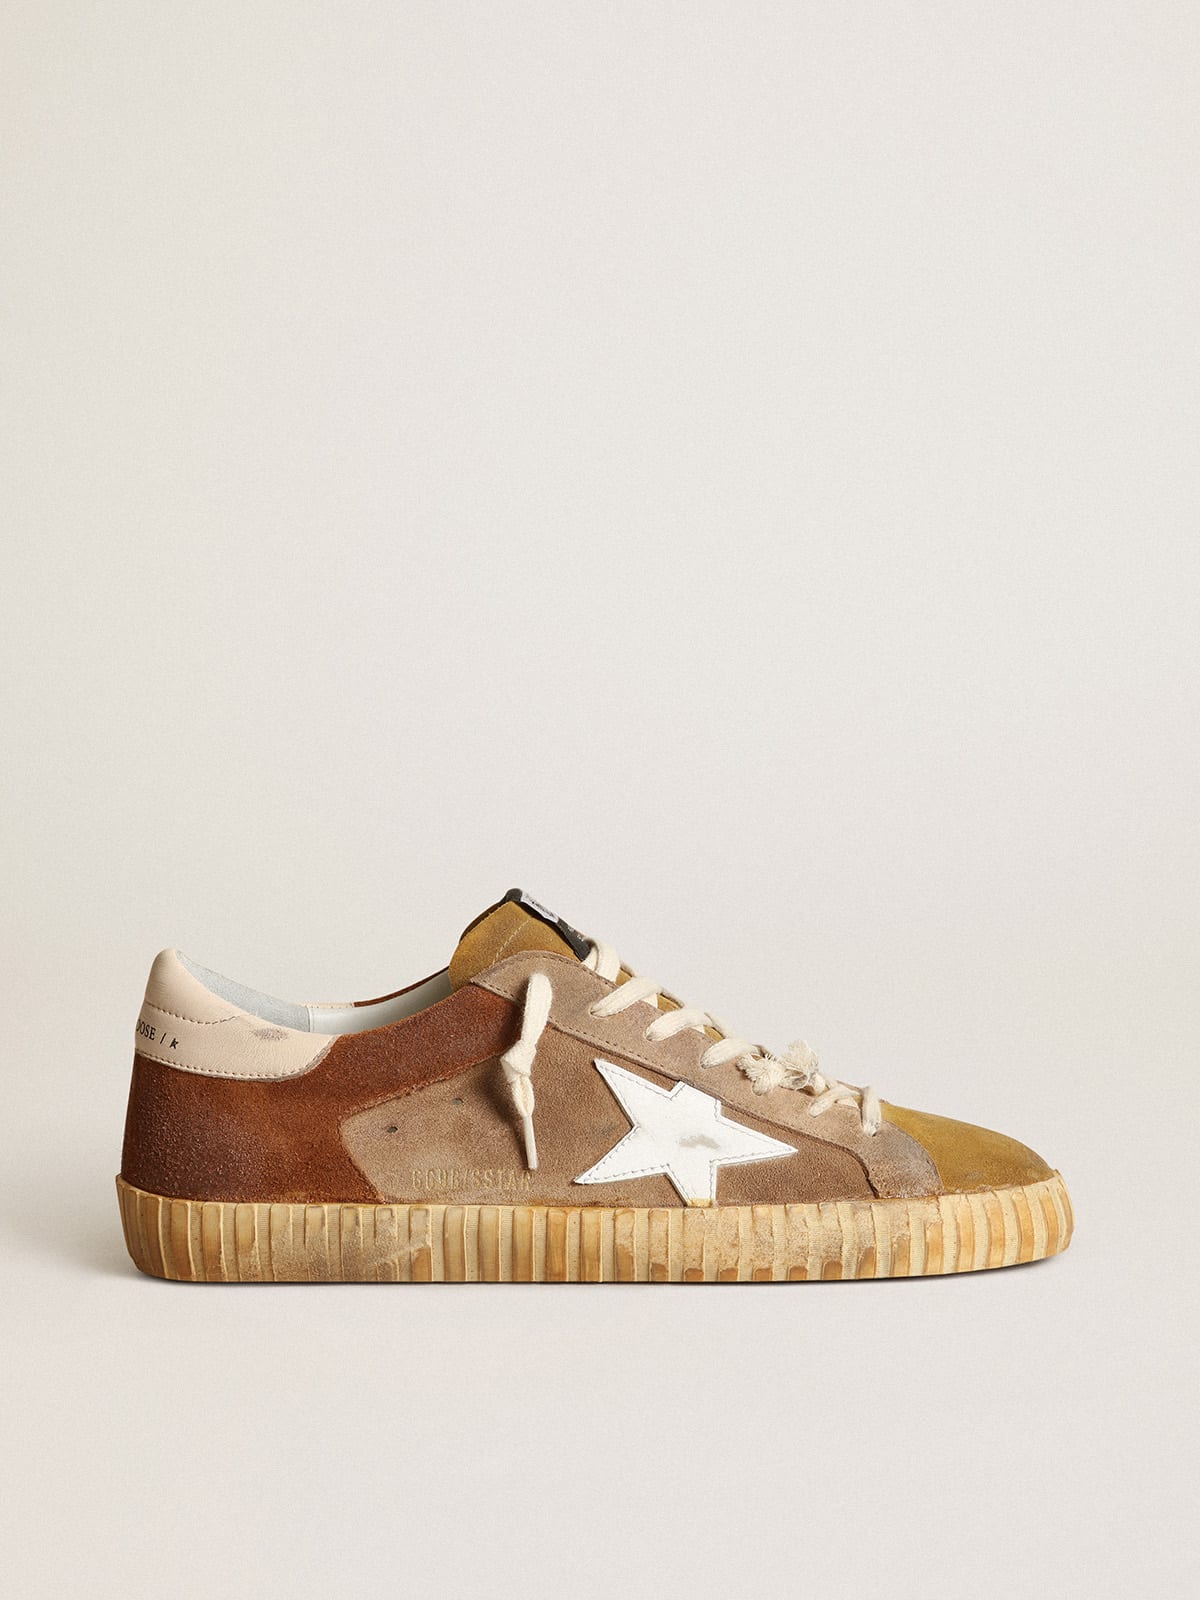 Men's Super-Star sneakers in tobacco and brown suede with white leather star